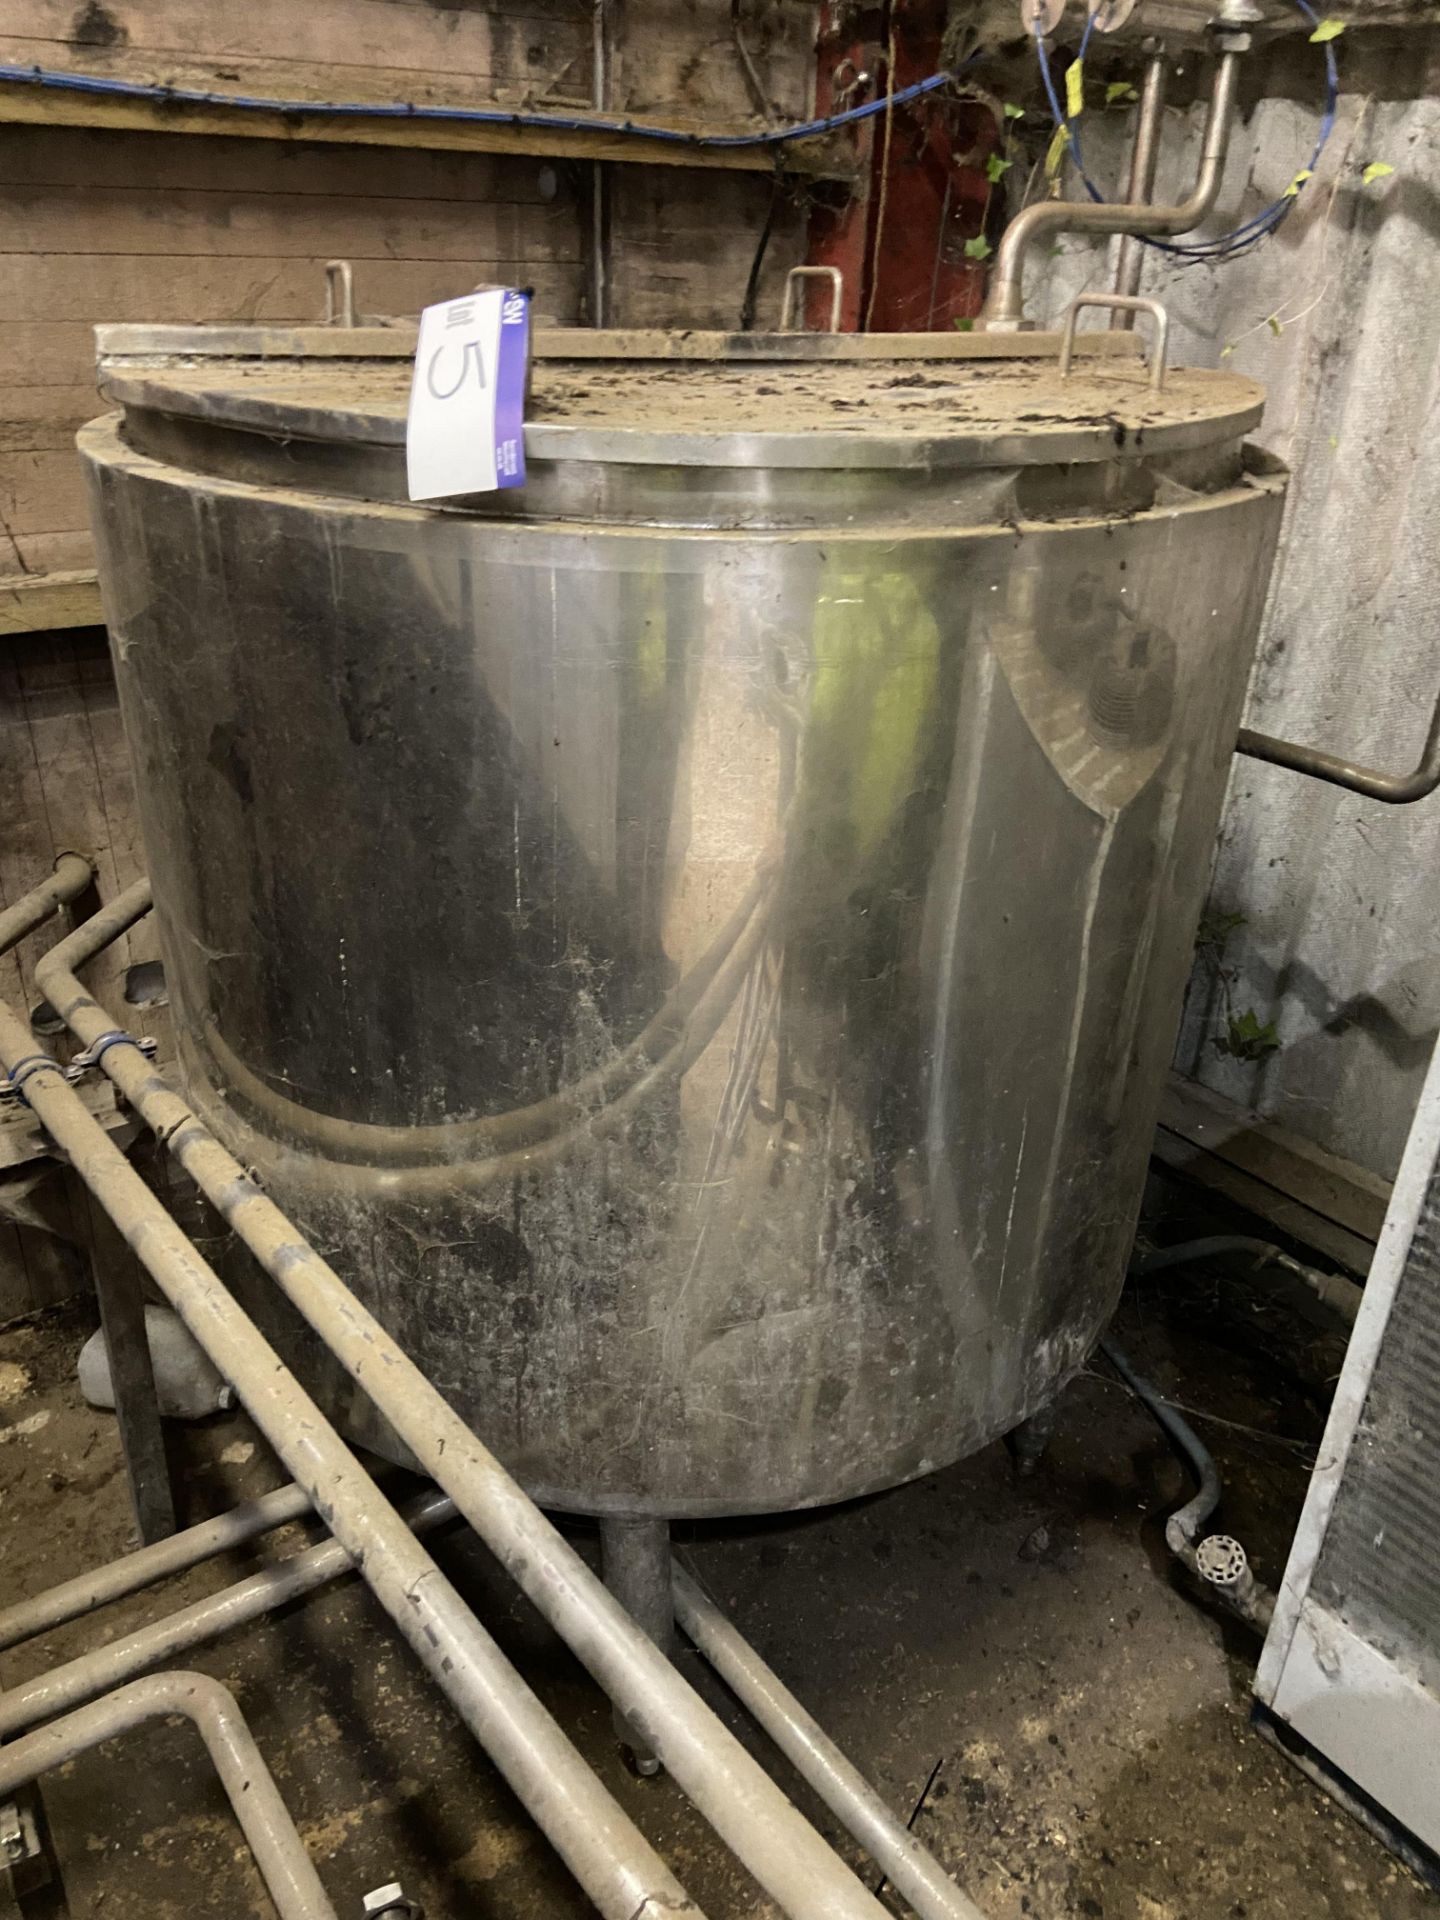 STAINLESS STEEL TANK, approx. 1.4m dia. x 1.2m deep, with insulated jacket, with two valves (